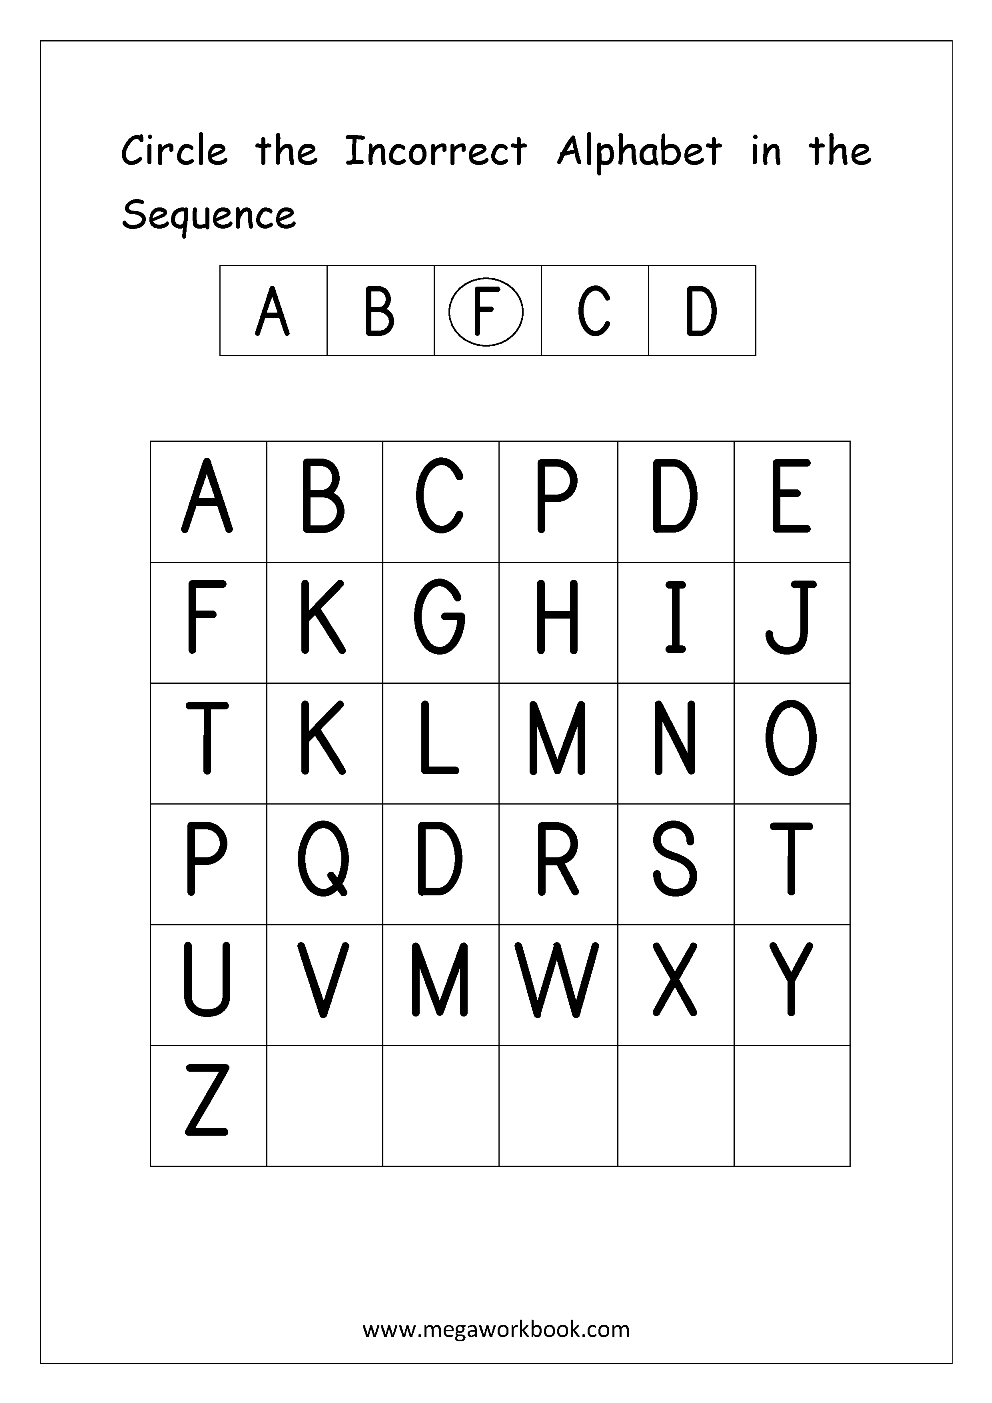 december-fun-filled-learning-with-no-prep-letter-activities-preschool-letter-sort-letter-n